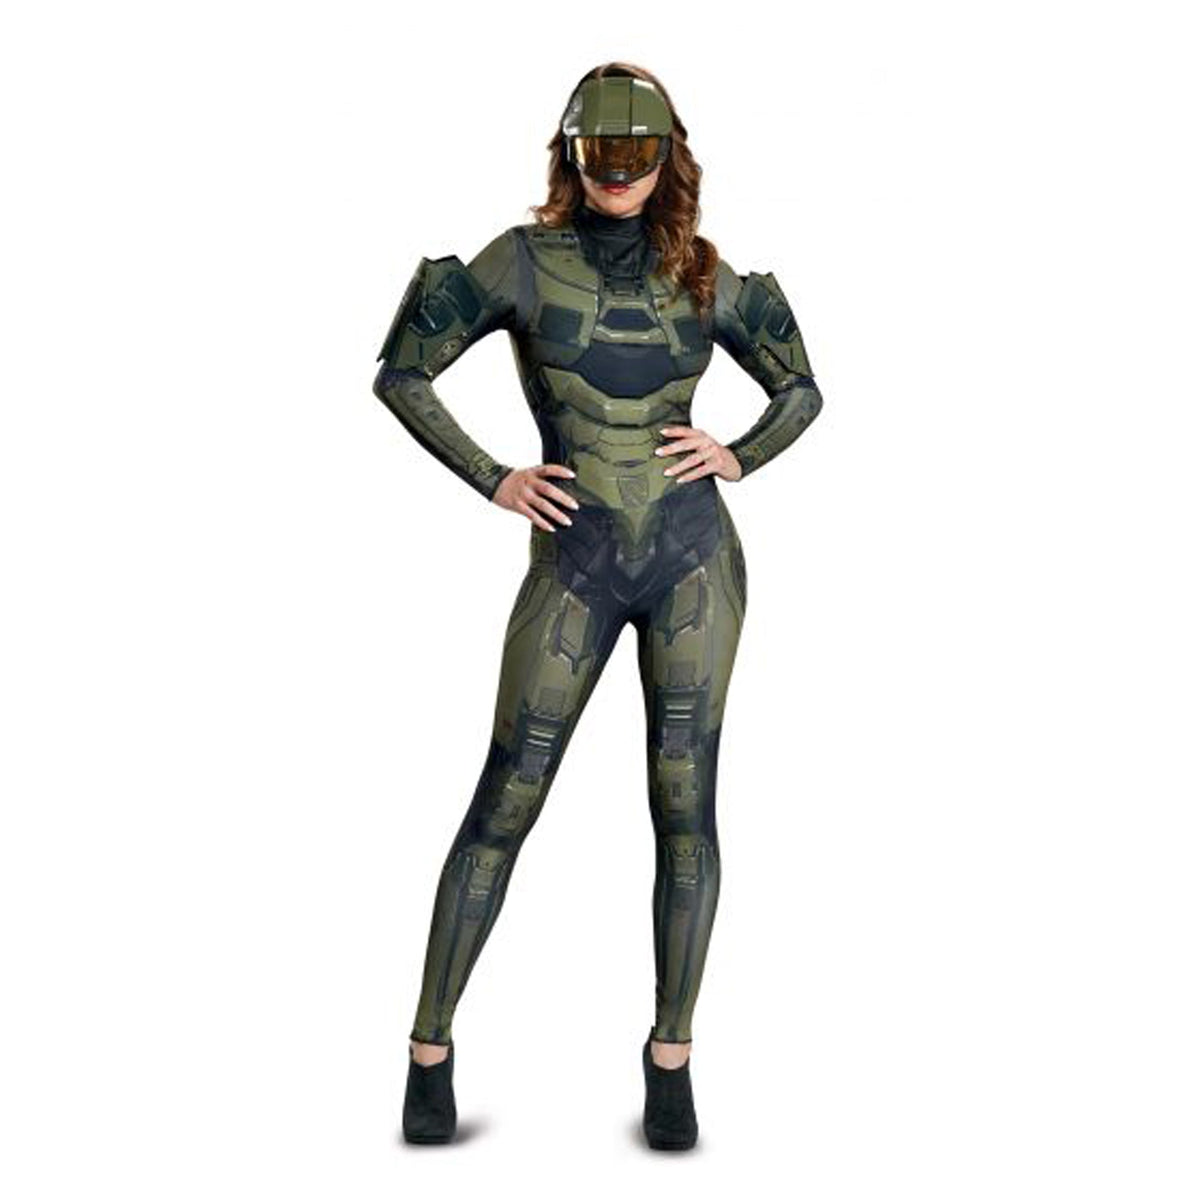 DISGUISE (TOY-SPORT) Costumes Halo Master Chief Female Deluxe Costume for Adults